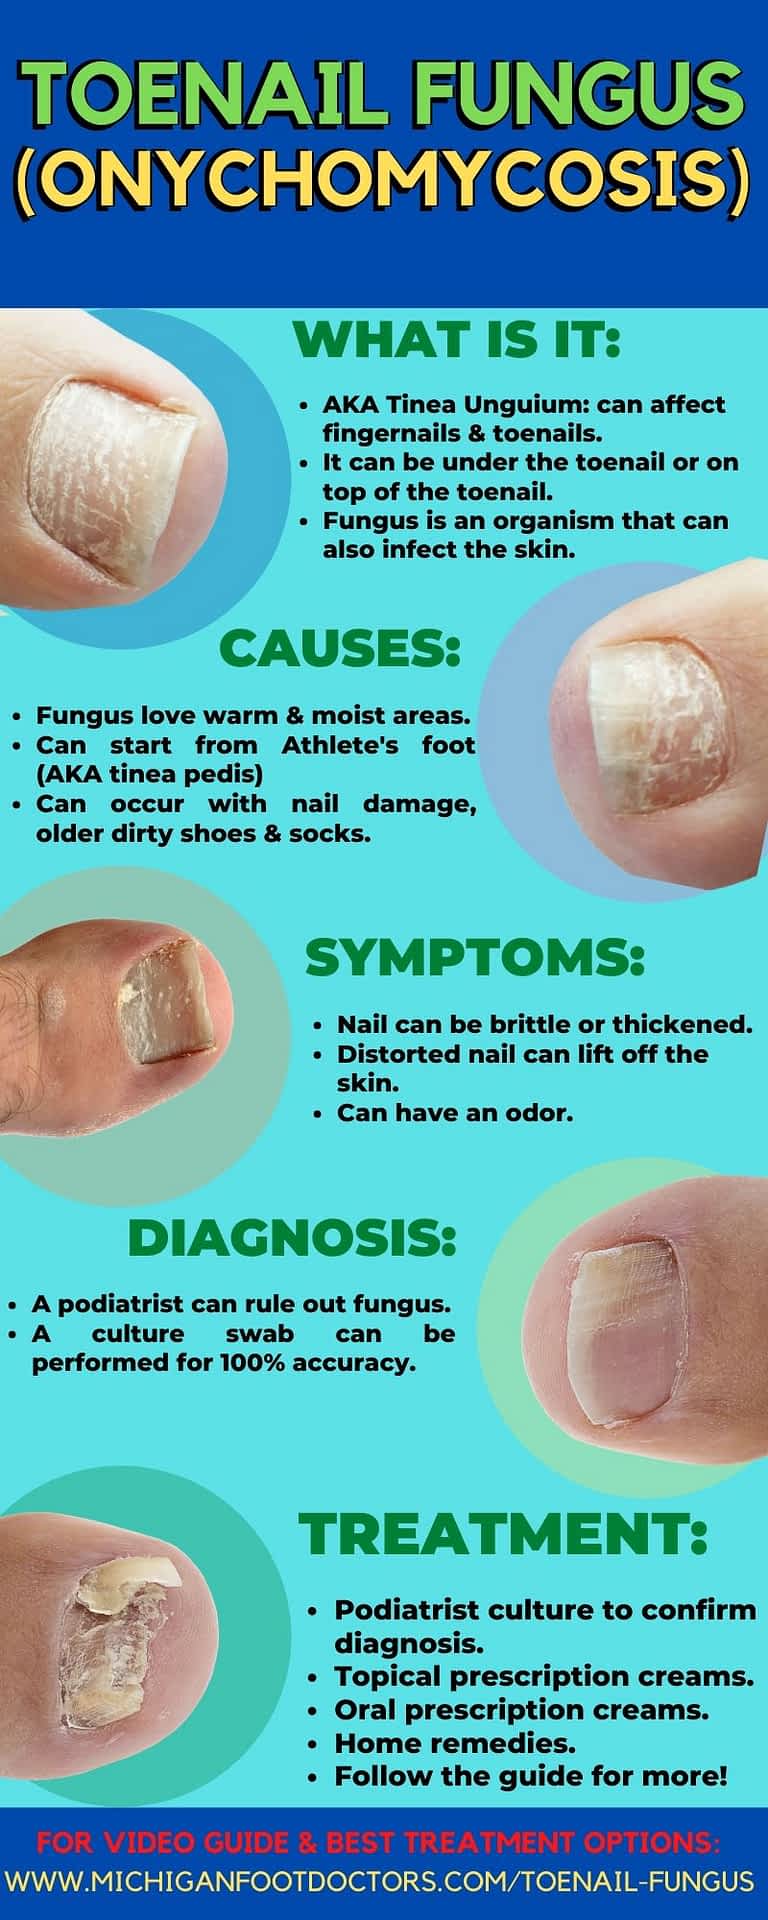 What Can I Use To Get Rid Of Toenail Fungus